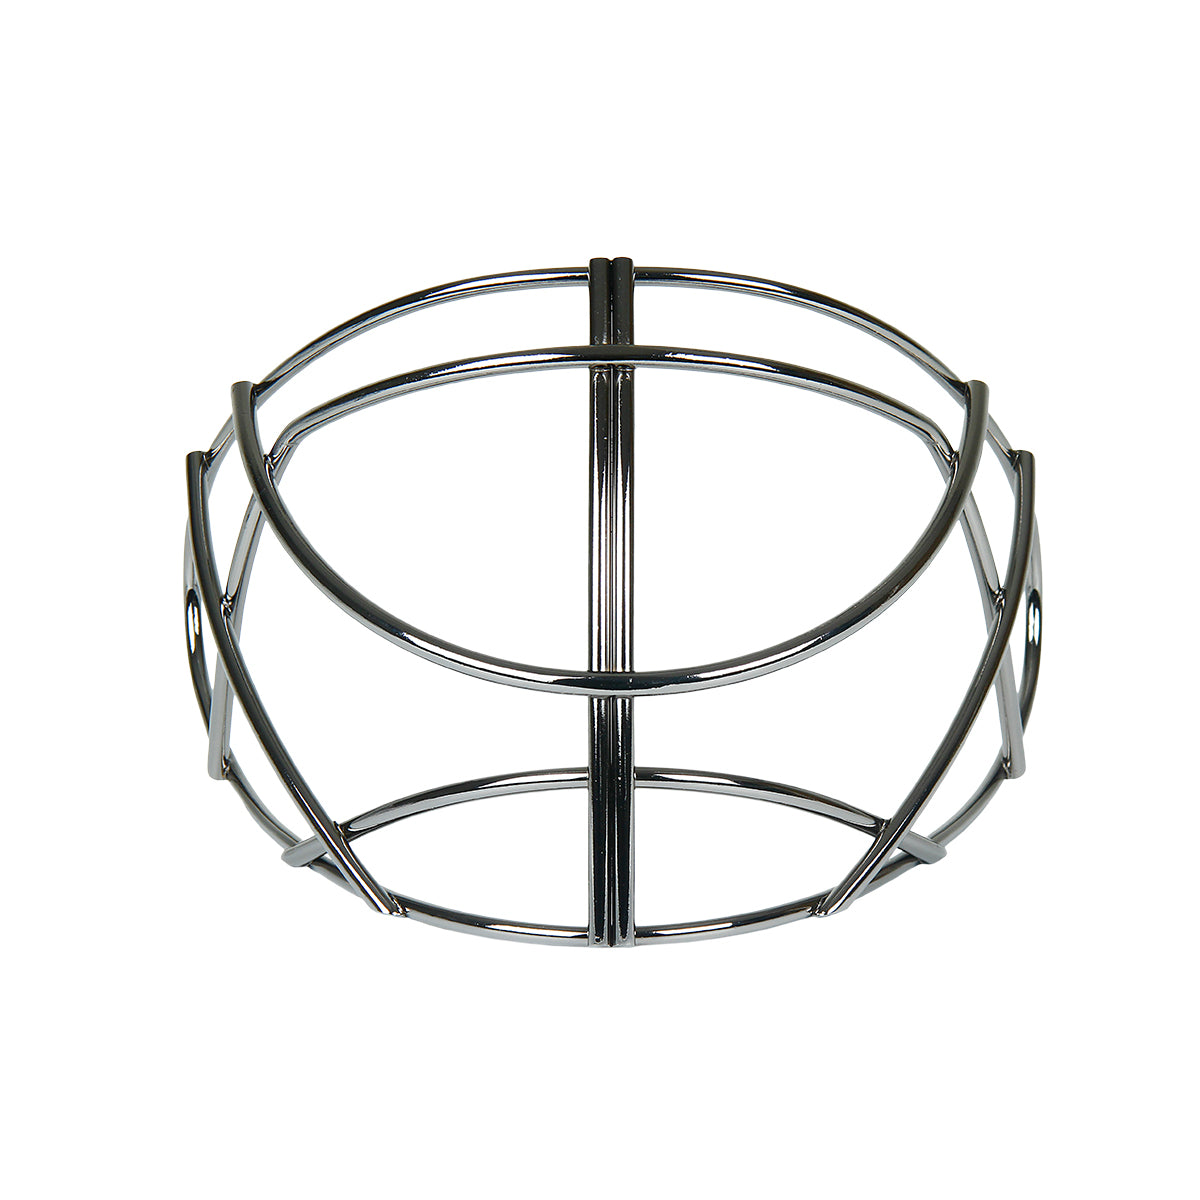 ABS Helmet Grill/Cage